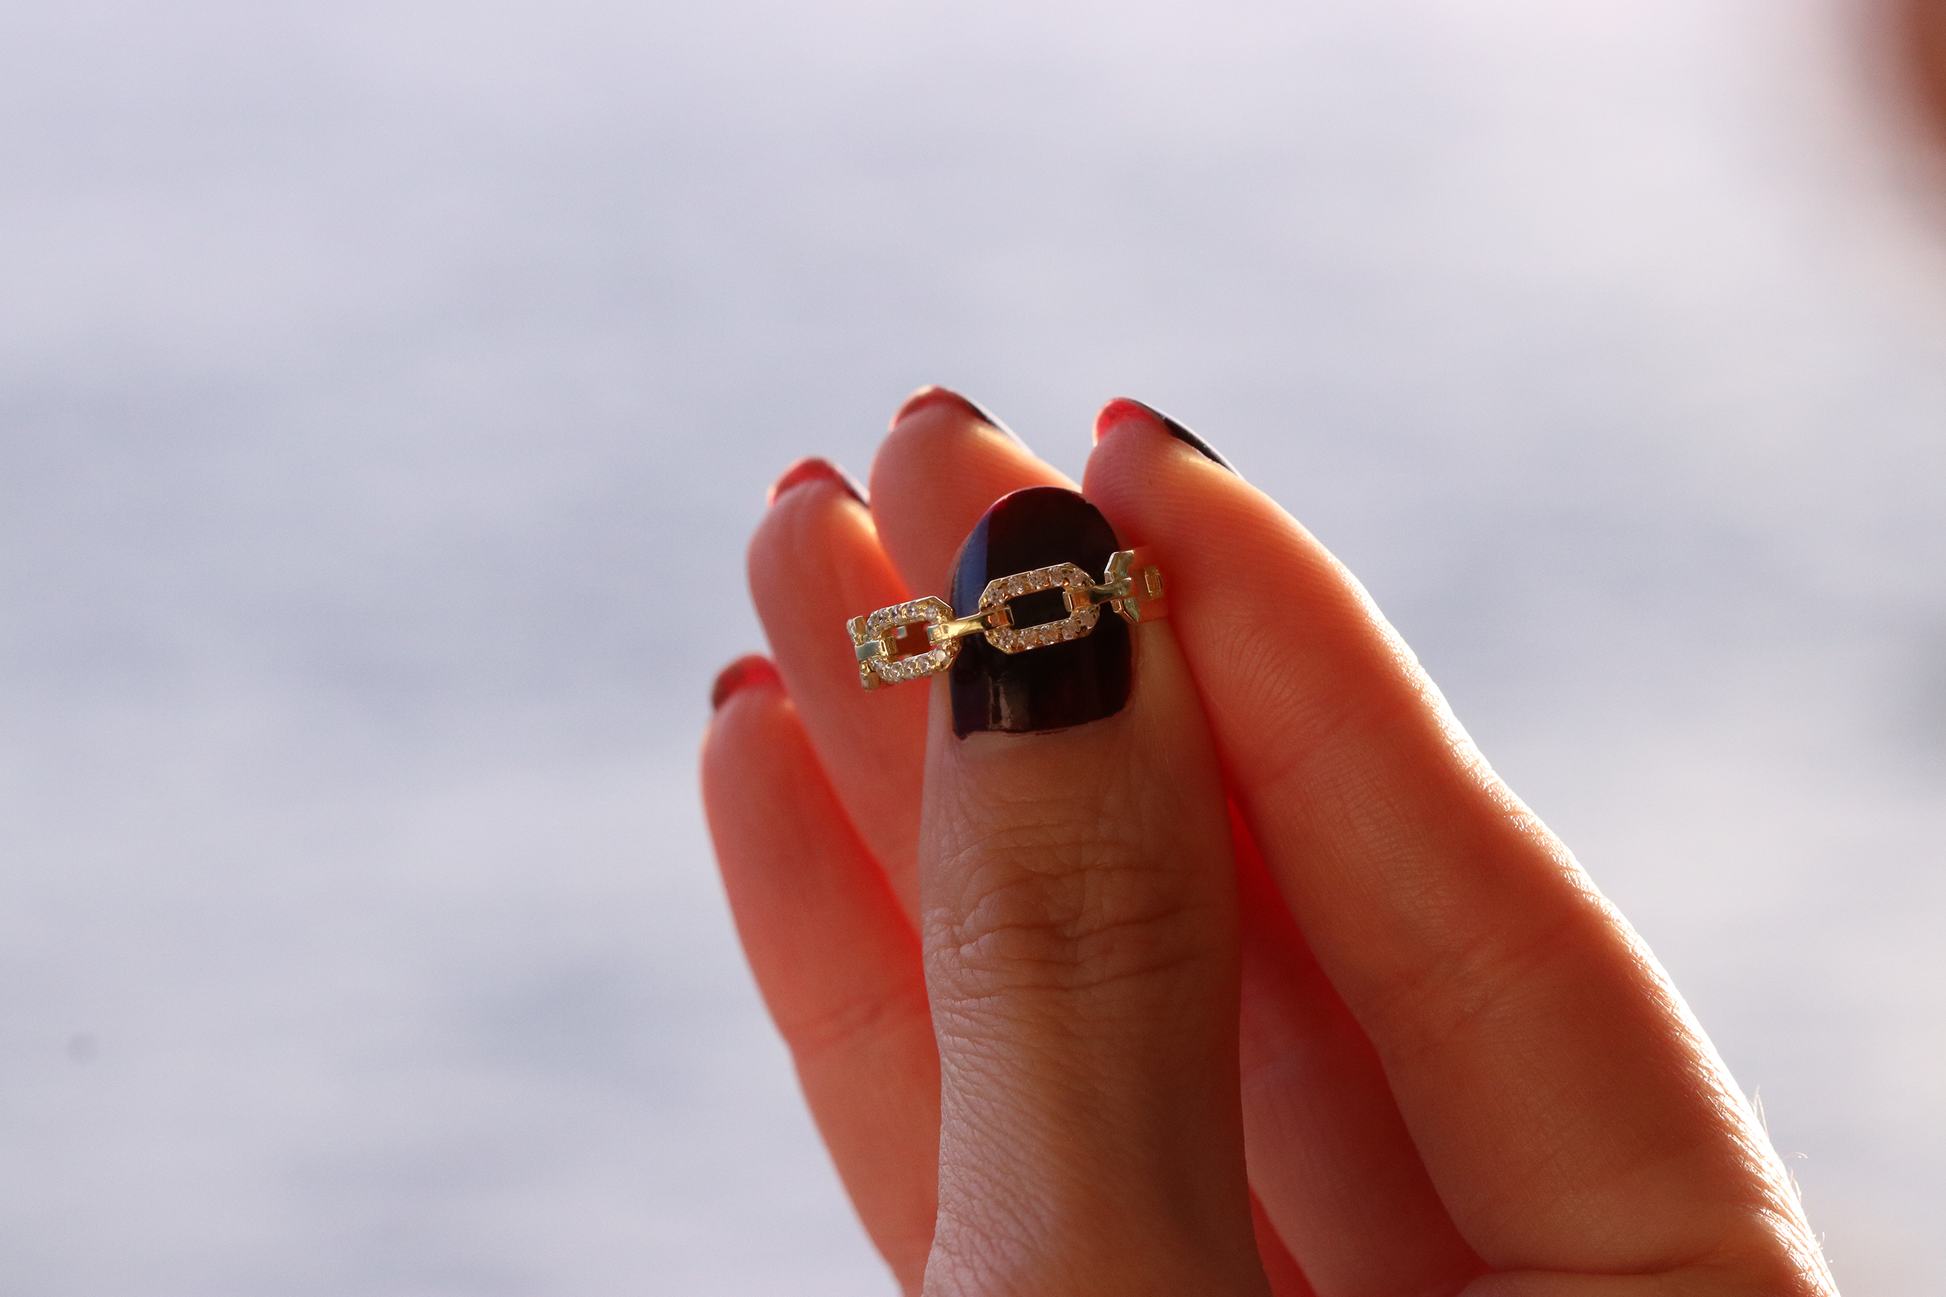 Nail rings set in gold - MAM